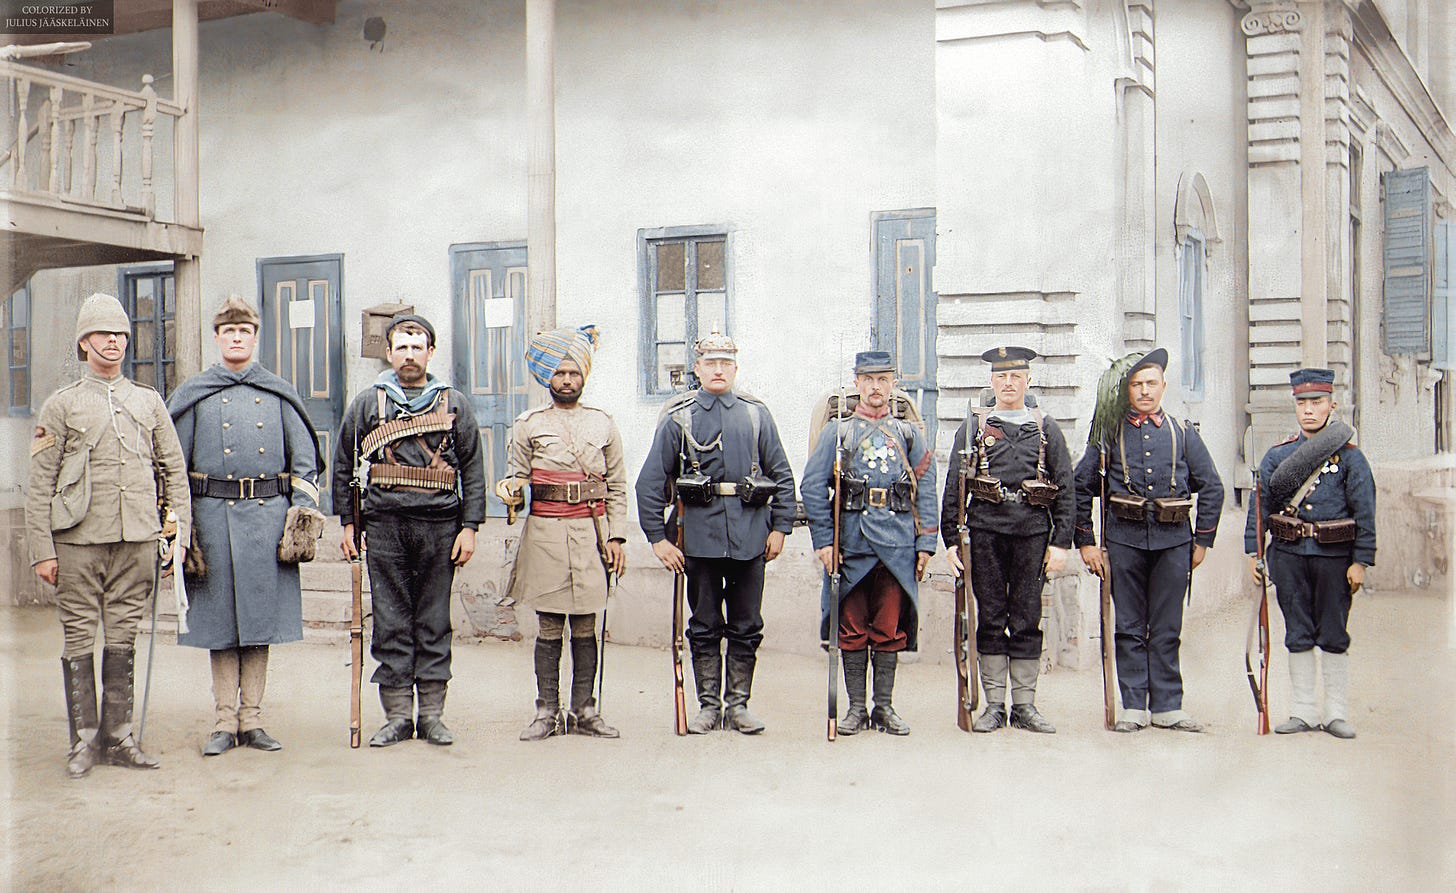 Troops of the Eight-Nation Alliance (except Russia) that fought against the Boxer Rebellion in China, 1900. From the left Britain, United States, Australia, India, Germany, France, Austria-Hungary, Italy, Japan. (49652330563).jpg